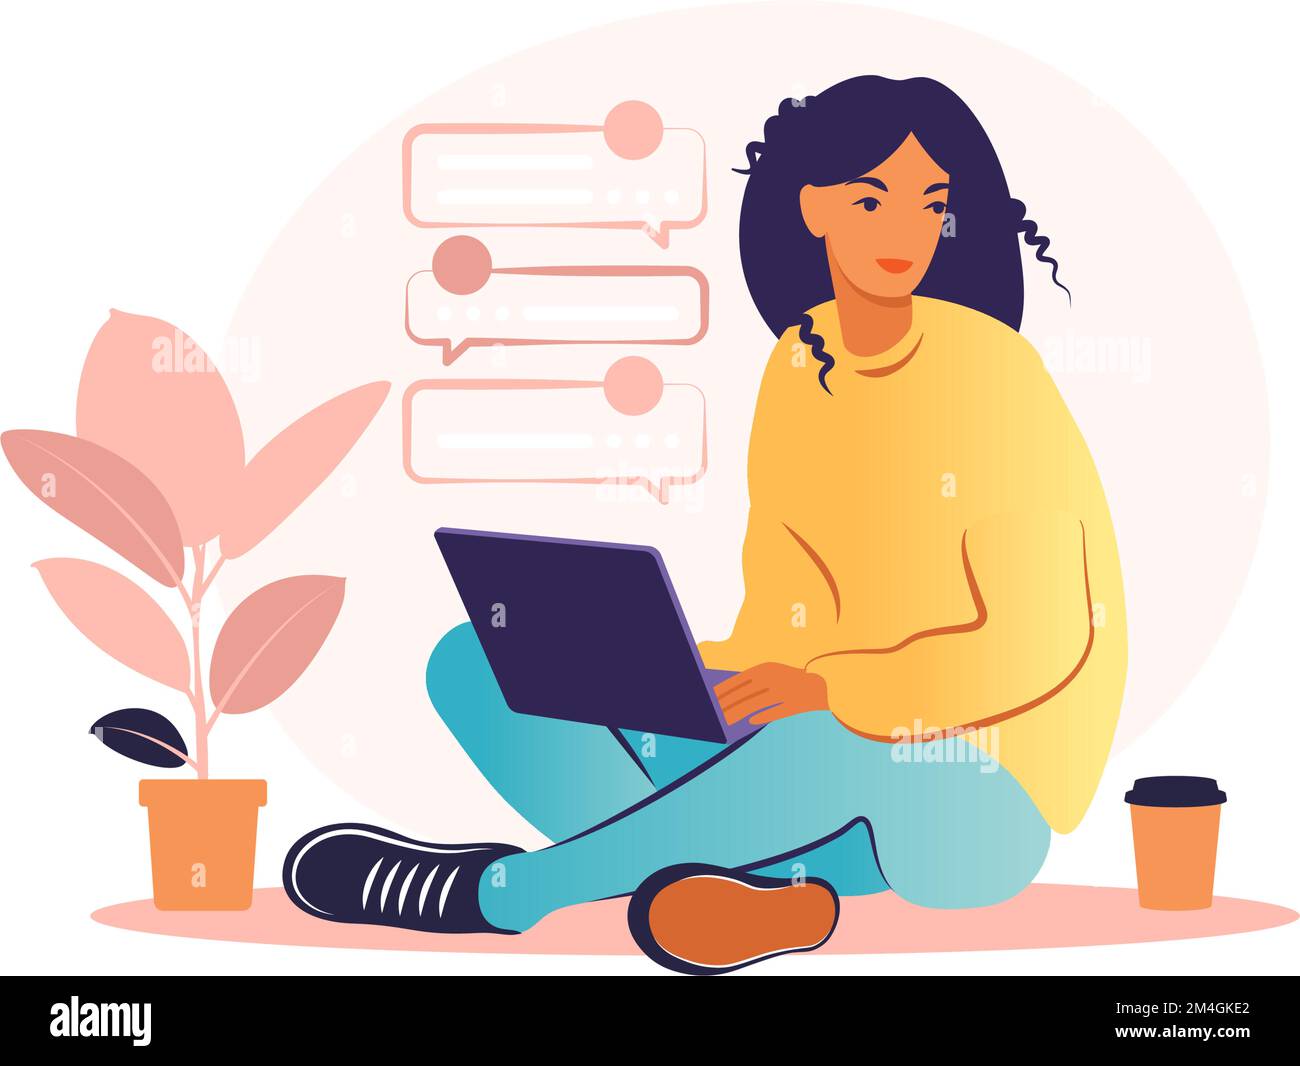 Woman sitting with laptop. Concept illustration for working, studying, education, work from home, healthy lifestyle. Can use for backgrounds Stock Vector